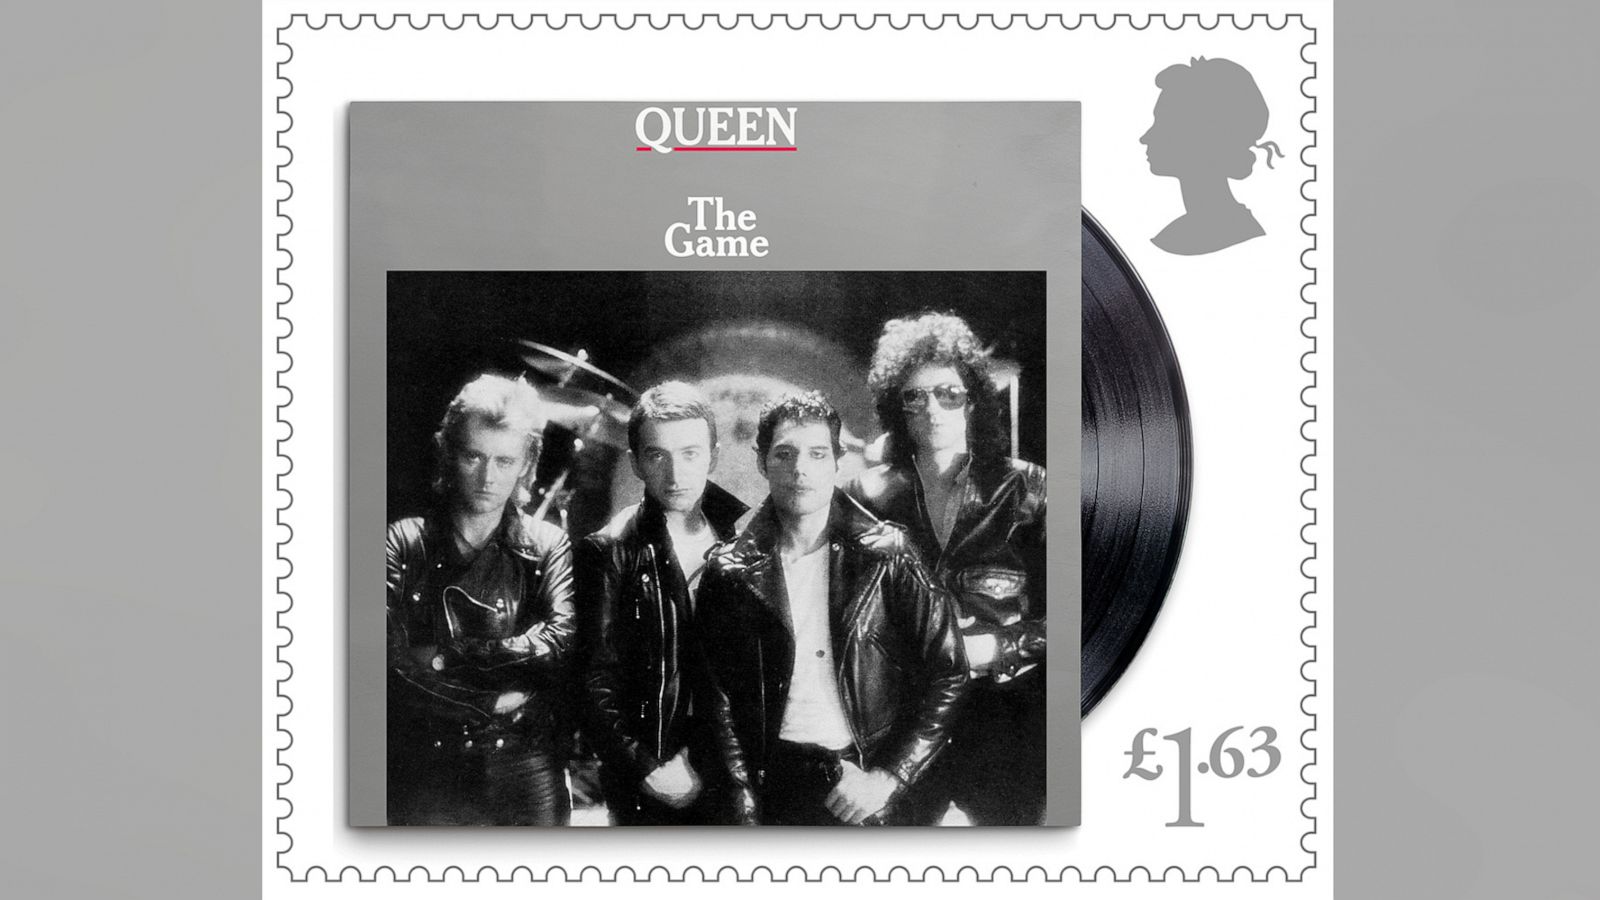 PHOTO: A design for one of a series of stamps issued by Royal Mail as a tribute to the band Queen is seen in this handout image obtained by Reuters on June 23, 2020.